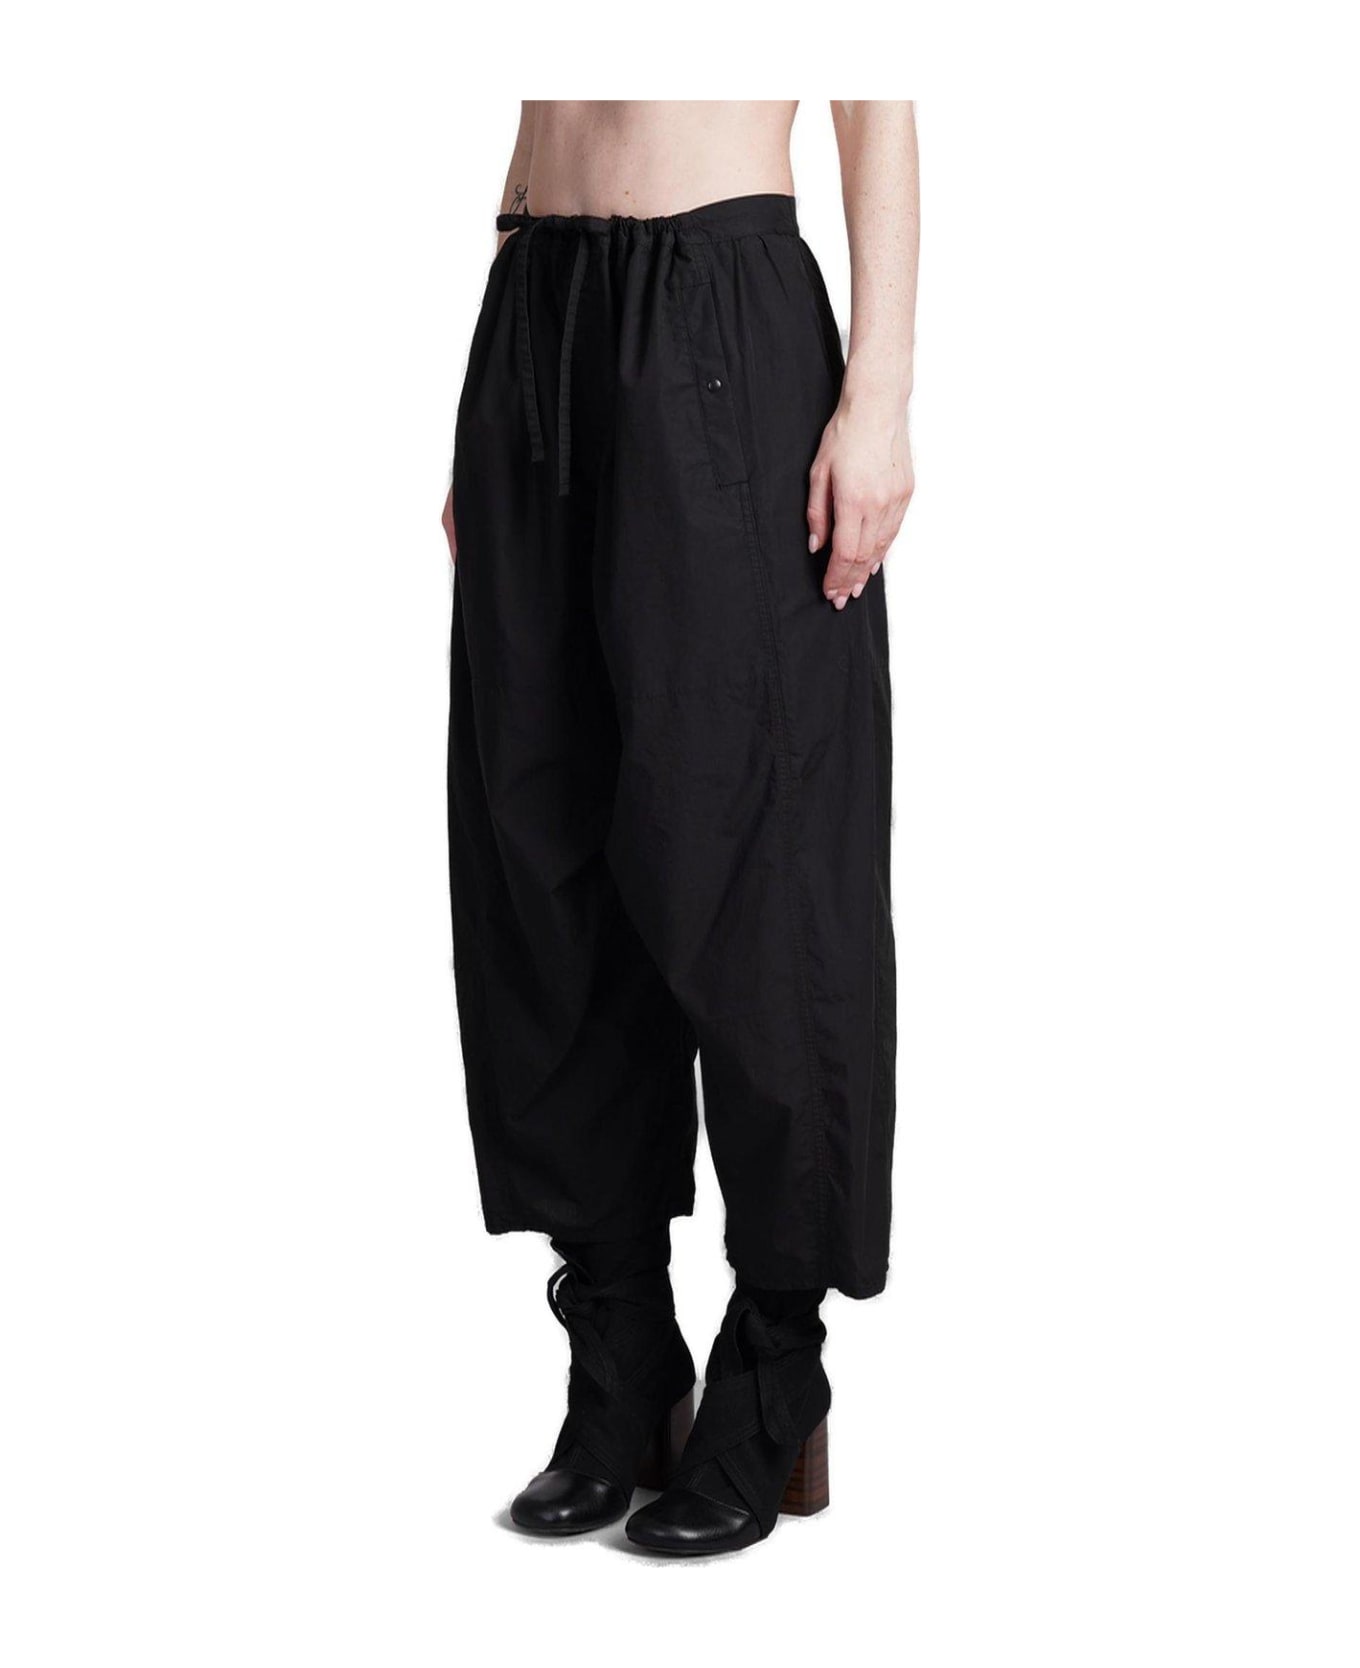 Lemaire Tapered Leg Drawstring Waist Trousers - BLACK ボトムス